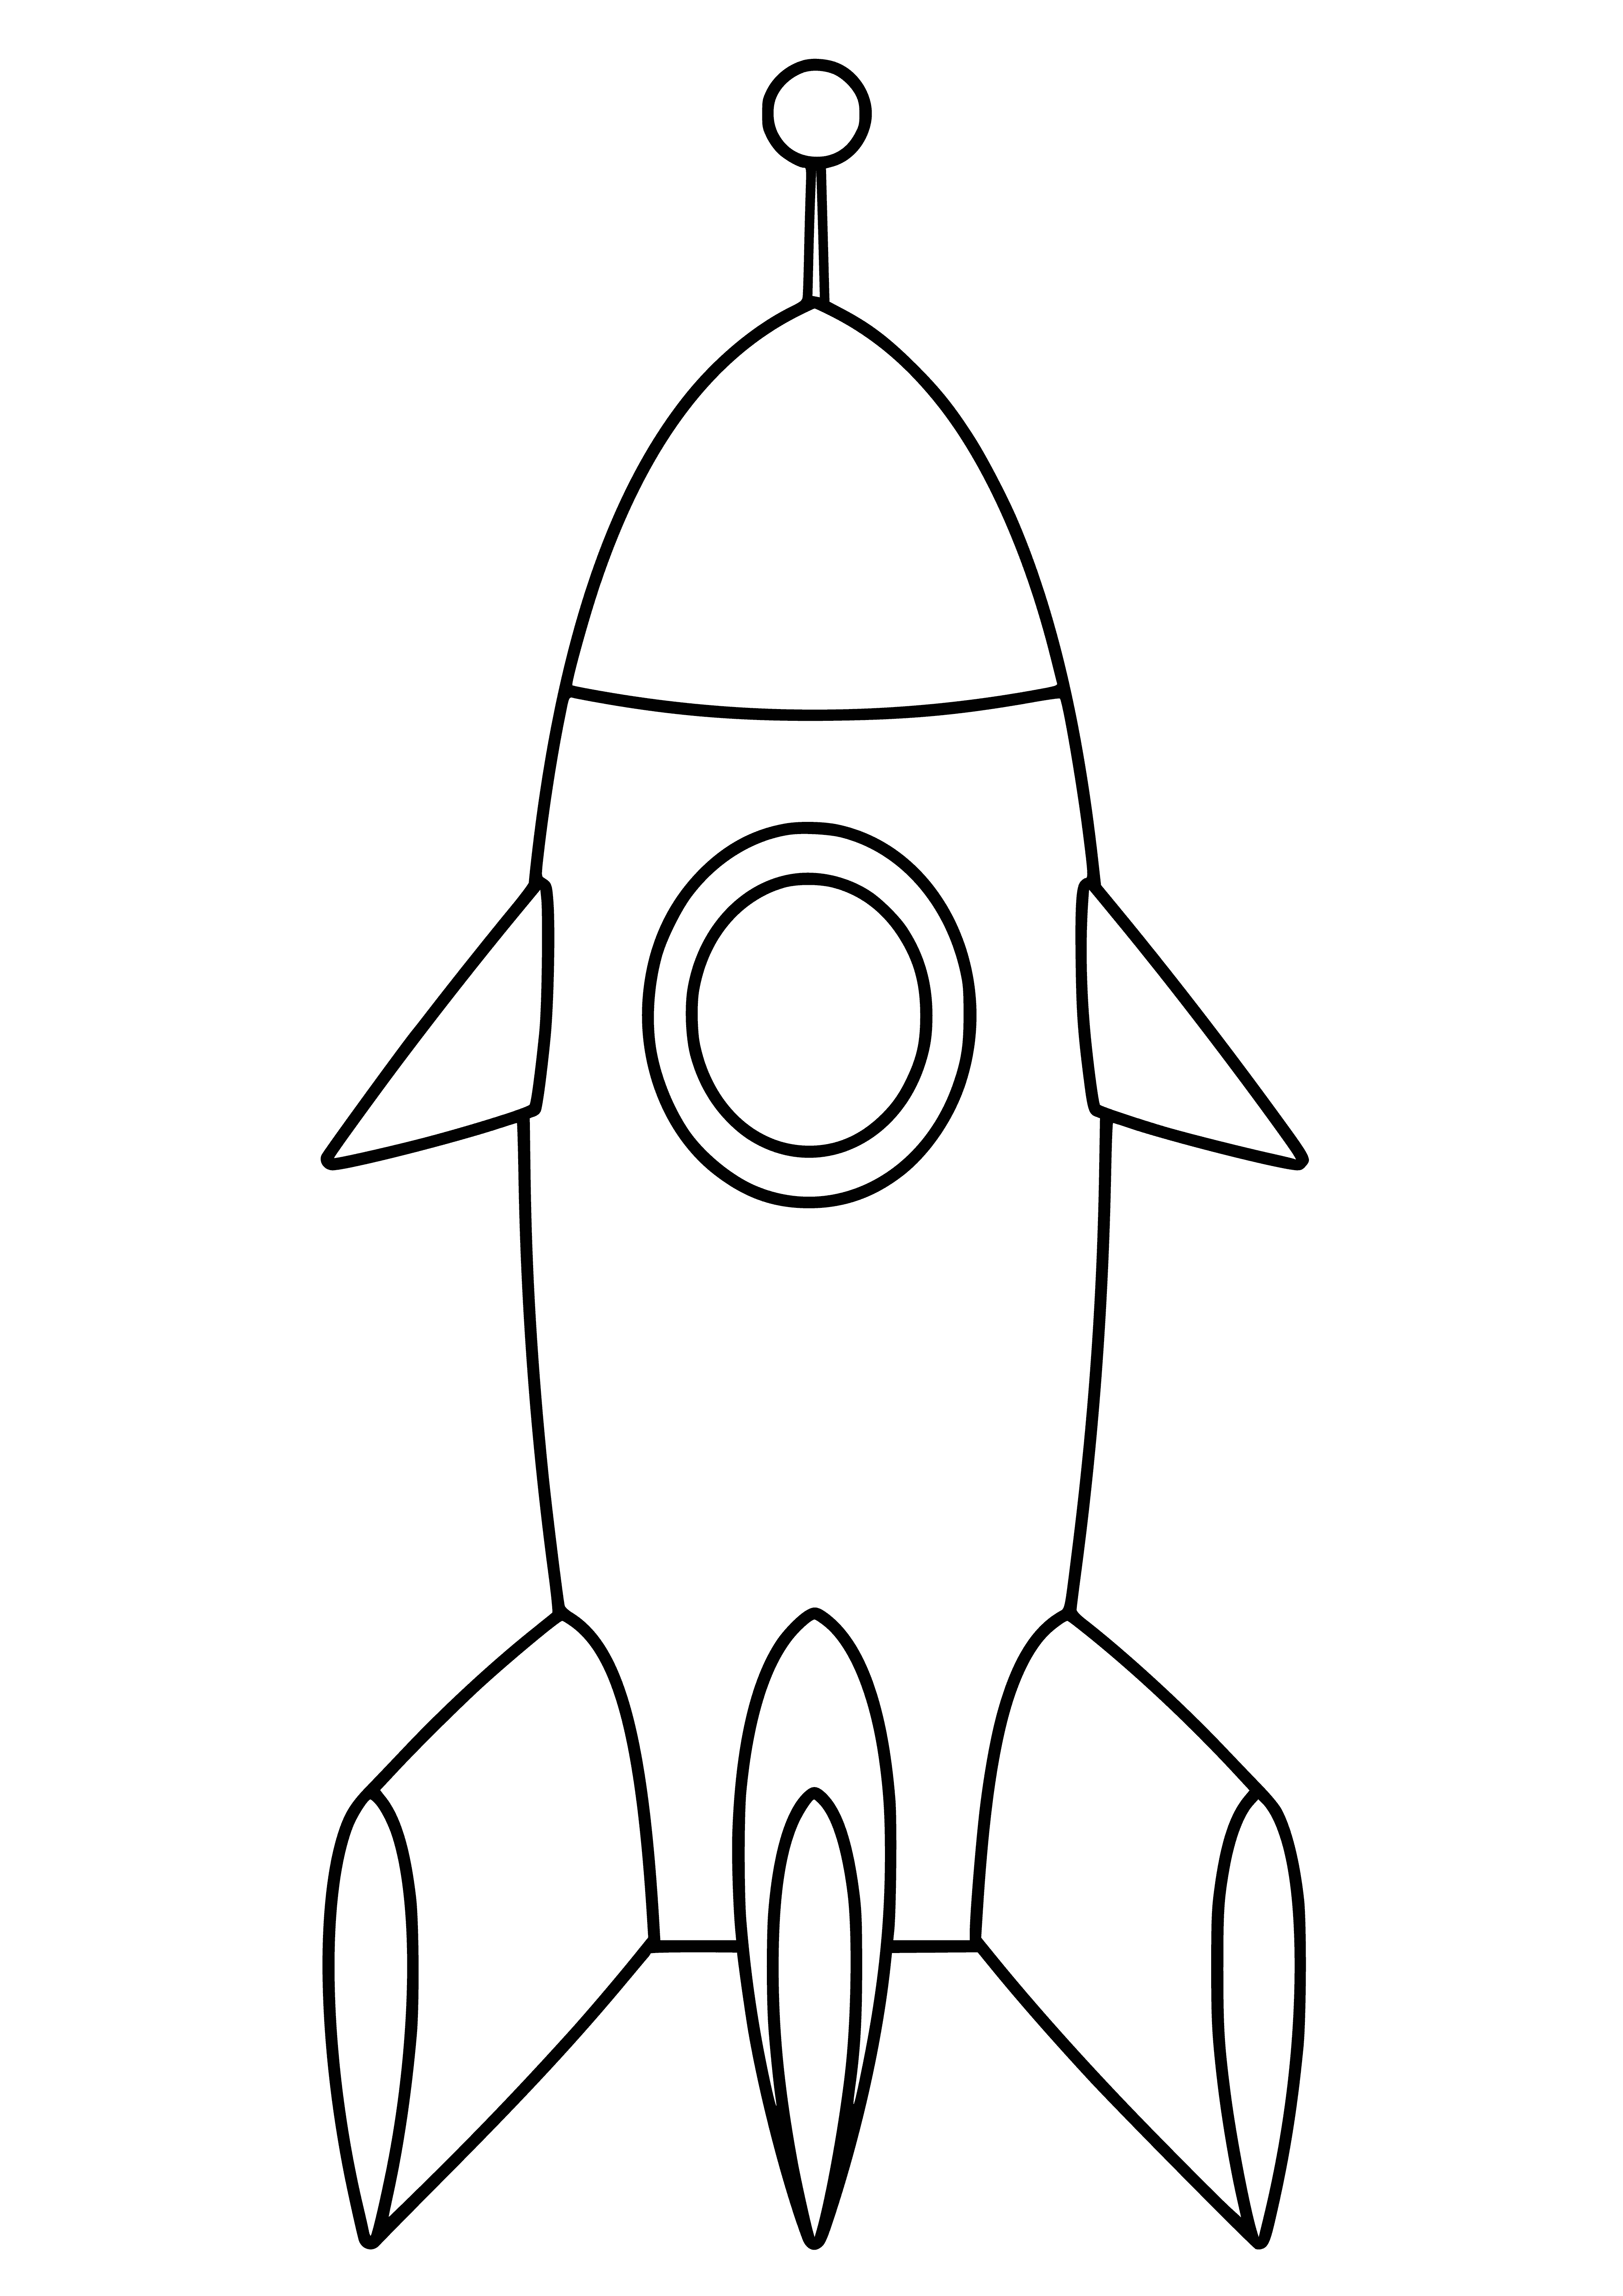 coloring page: Large gray rocket with red, yellow, orange stripes, four large fins, two smaller ones near top, two windows, door, red flag, and ladder leading up. #rocket #space